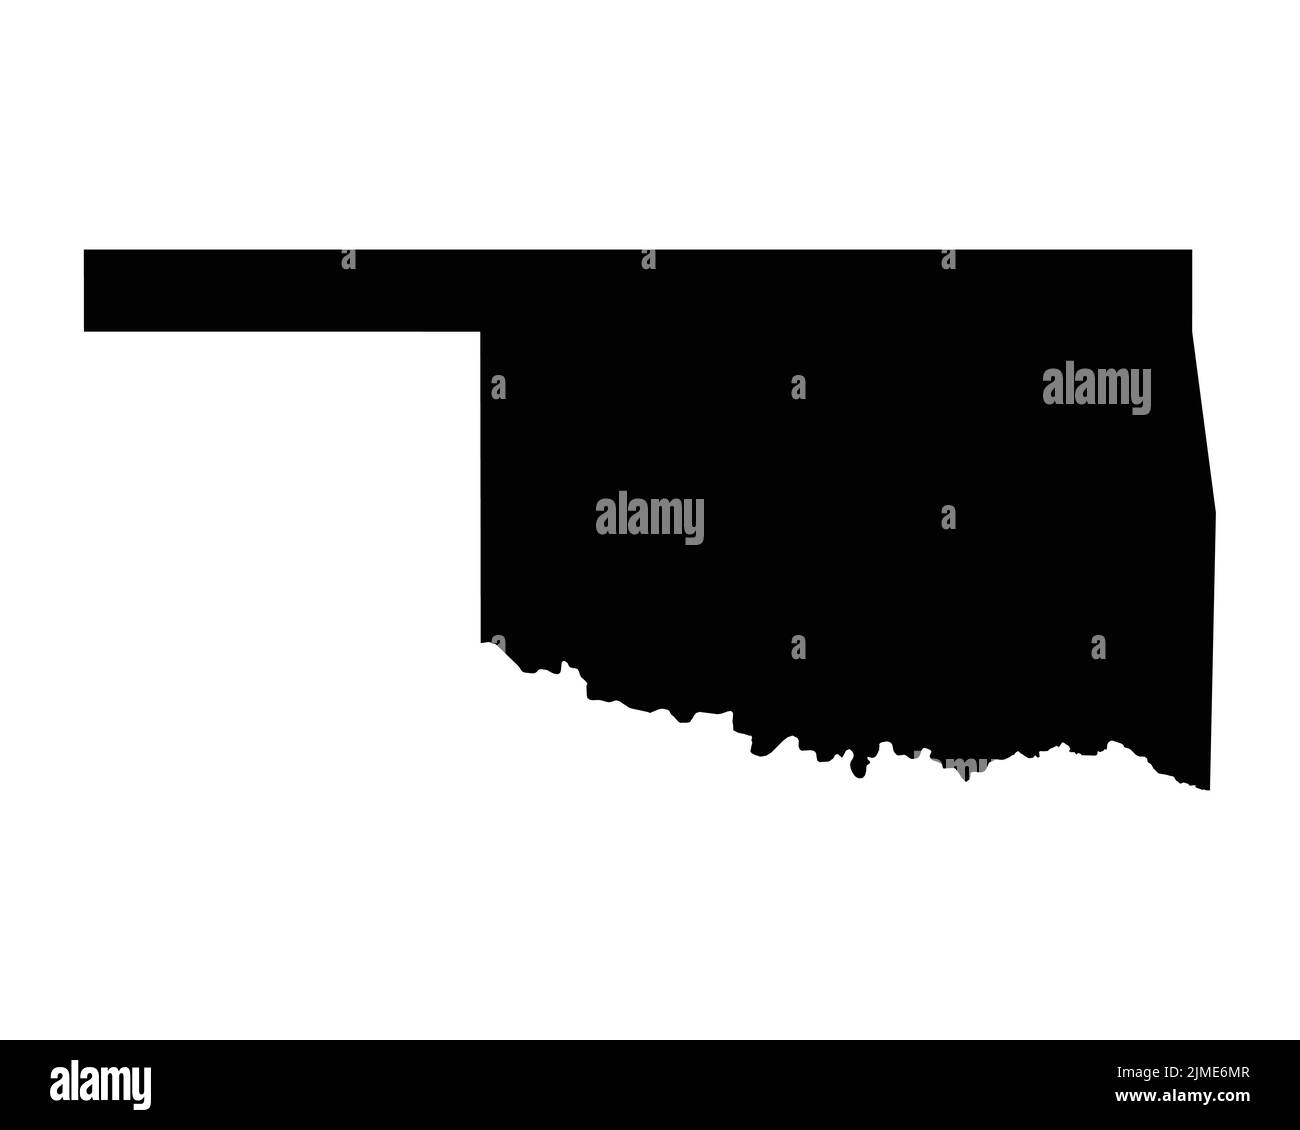 Oklahoma US Map. OK USA State Map. Black and White Oklahoman State Border Boundary Line Outline Geography Territory Shape Vector Illustration EPS Clip Stock Vector